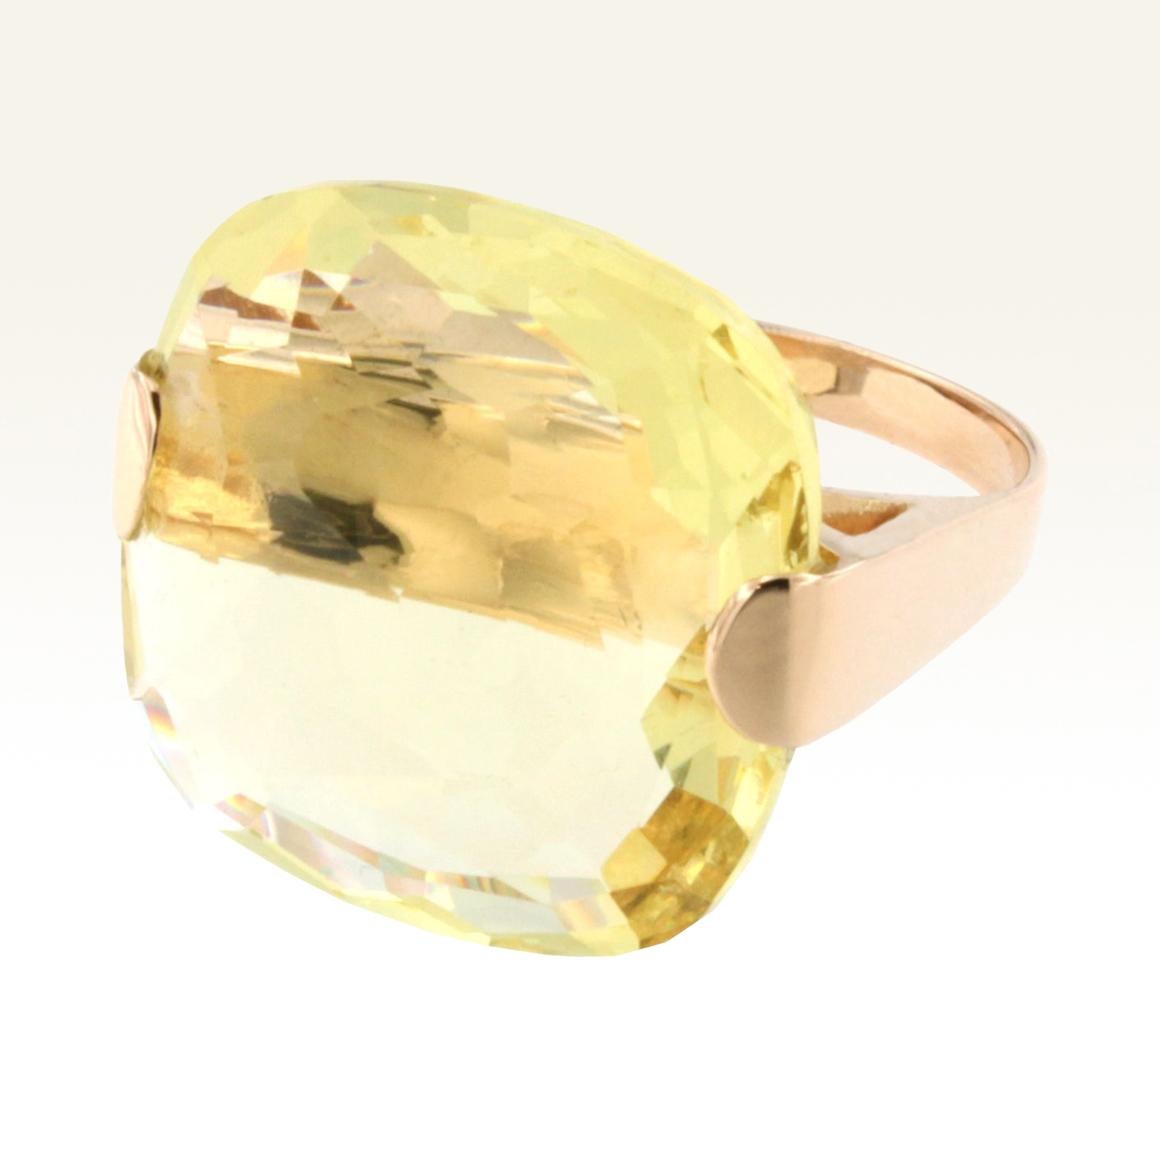 Ring in 18 karat rose gold with Lemon Quartz Square cut (size: 20x20 mm)
Size of ring EU 14.5 or USA 7
The particular cut combined with the Yellow color of the stone create a trendy and very pretty jewel. 
Very Fashion and easy to wear ring.